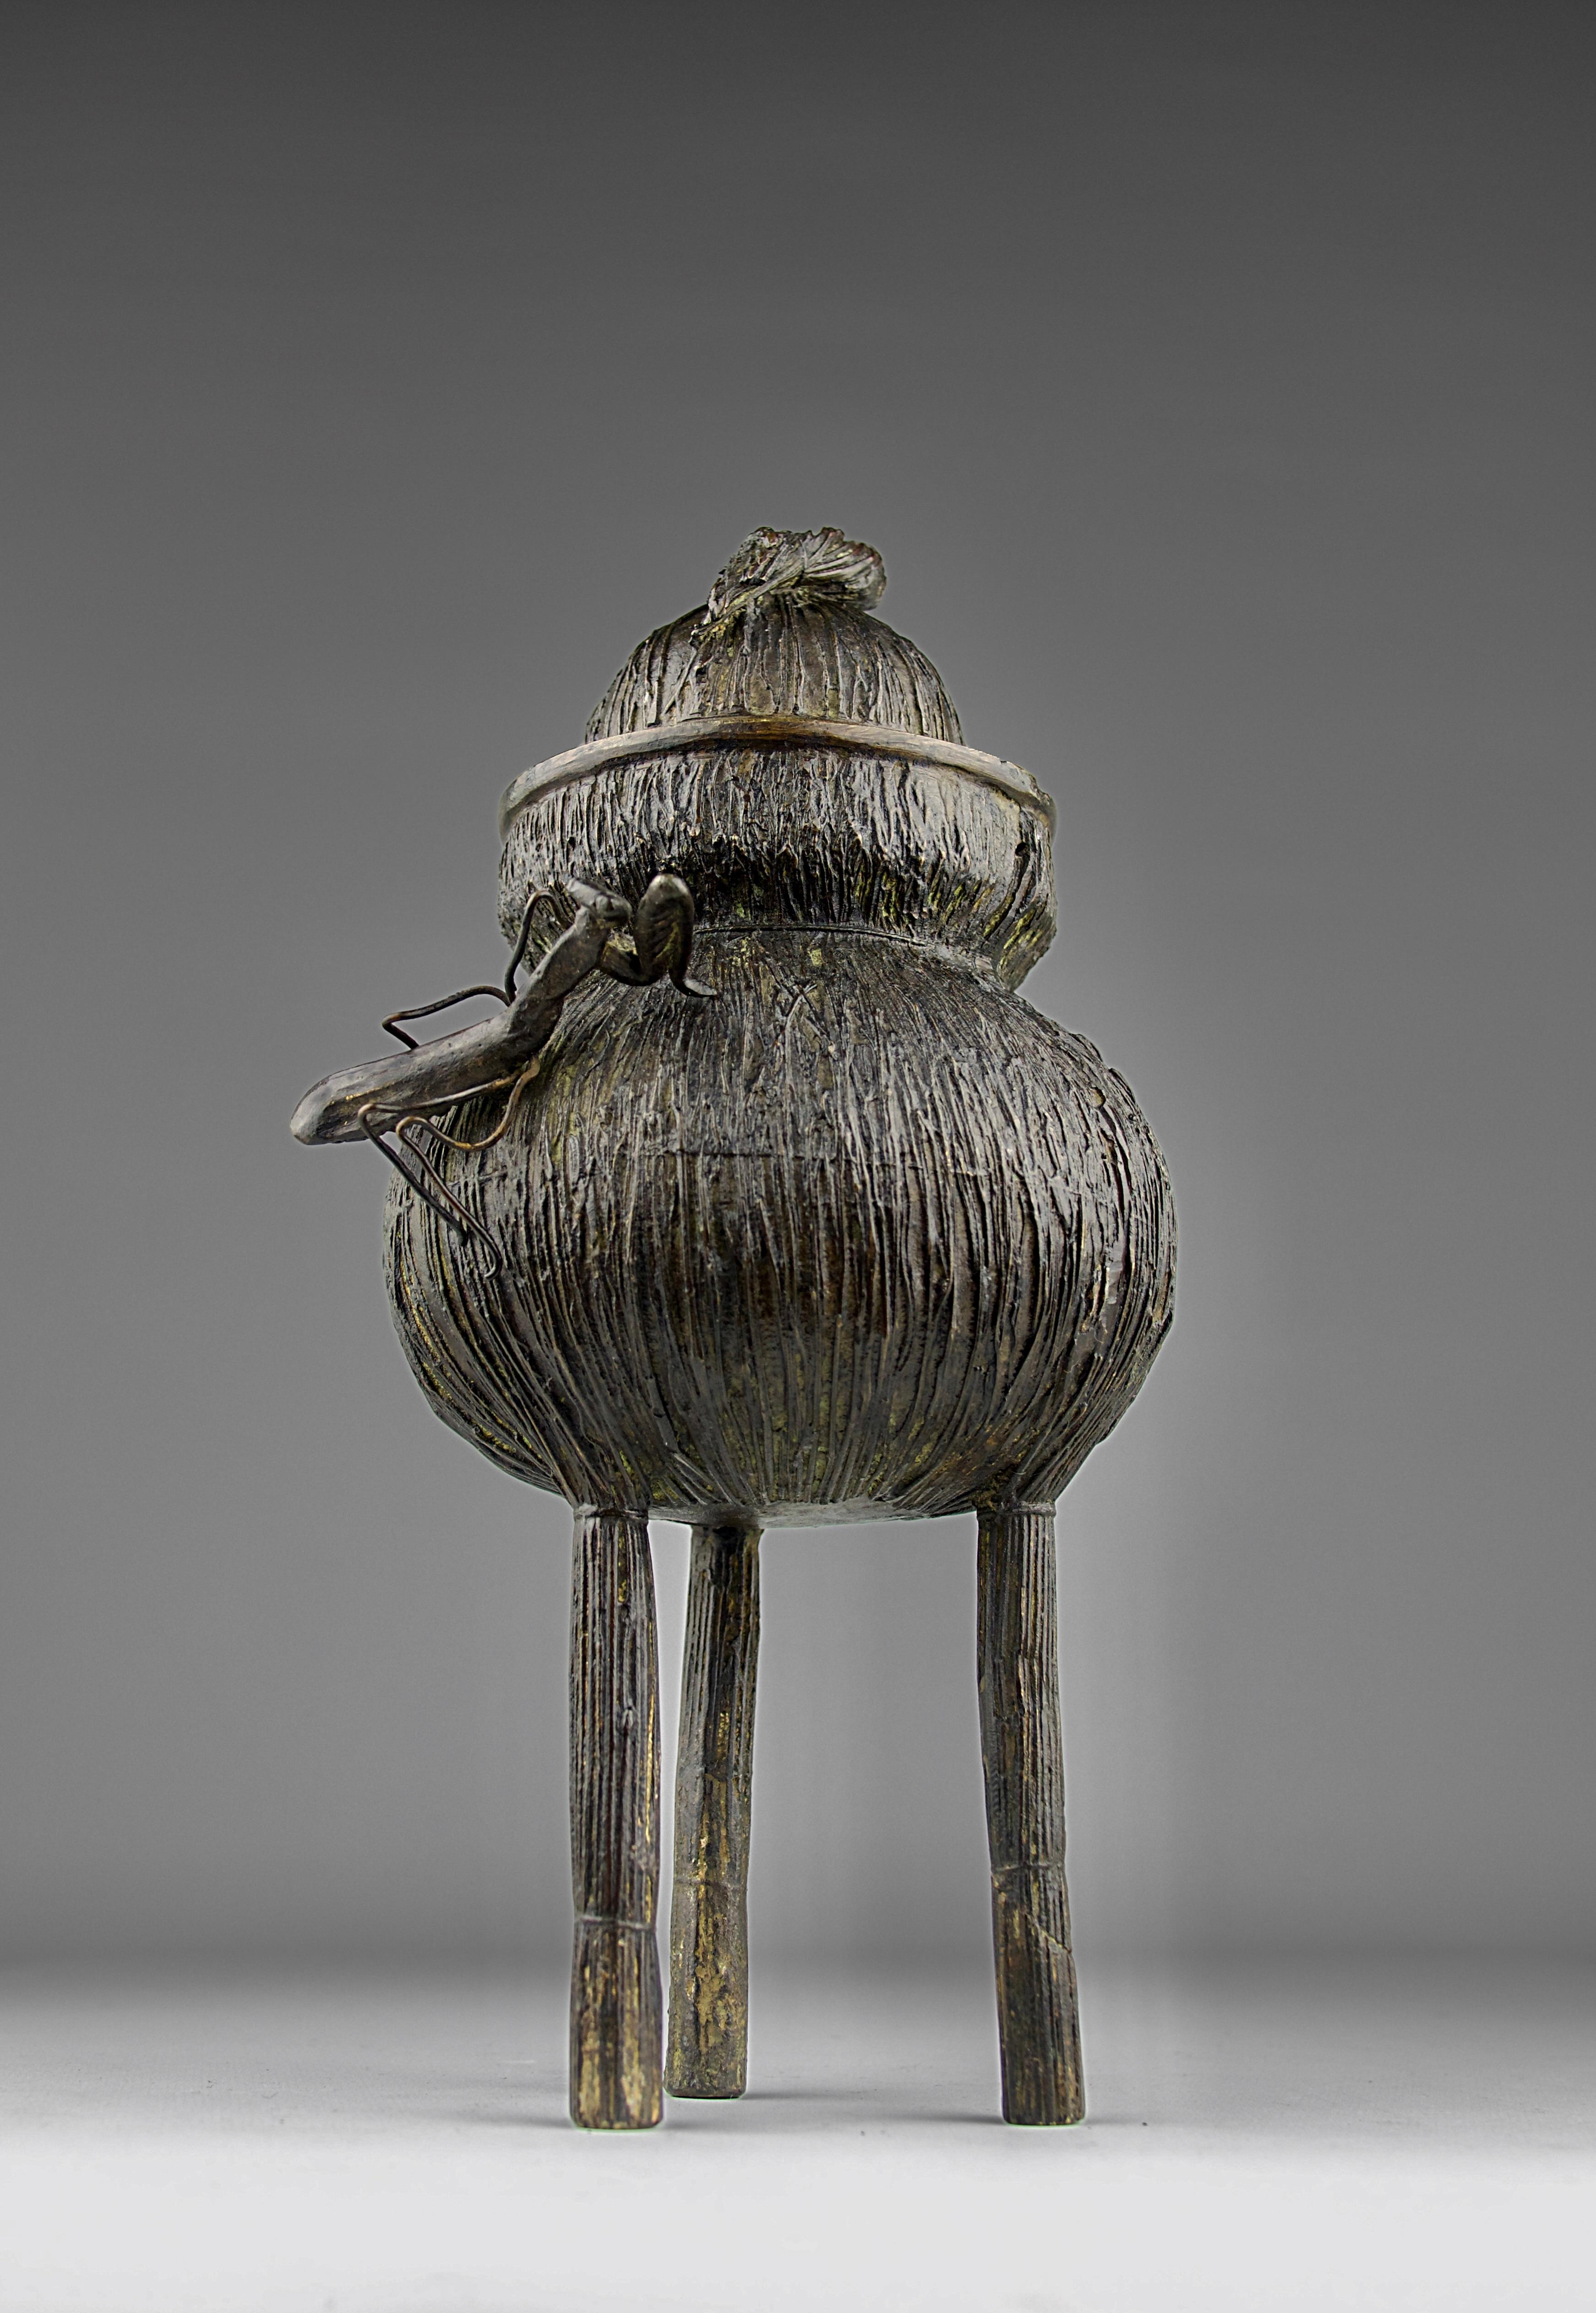 Beautiful incense burner in the shape of a straw basket with a praying mantis sitting on top. Bronze, Japan 19th century.

Good condition, oxidation, one leg missing from the praying mantis.

Dimensions in cm ( H x L x l ) : 26 x 14.5 x